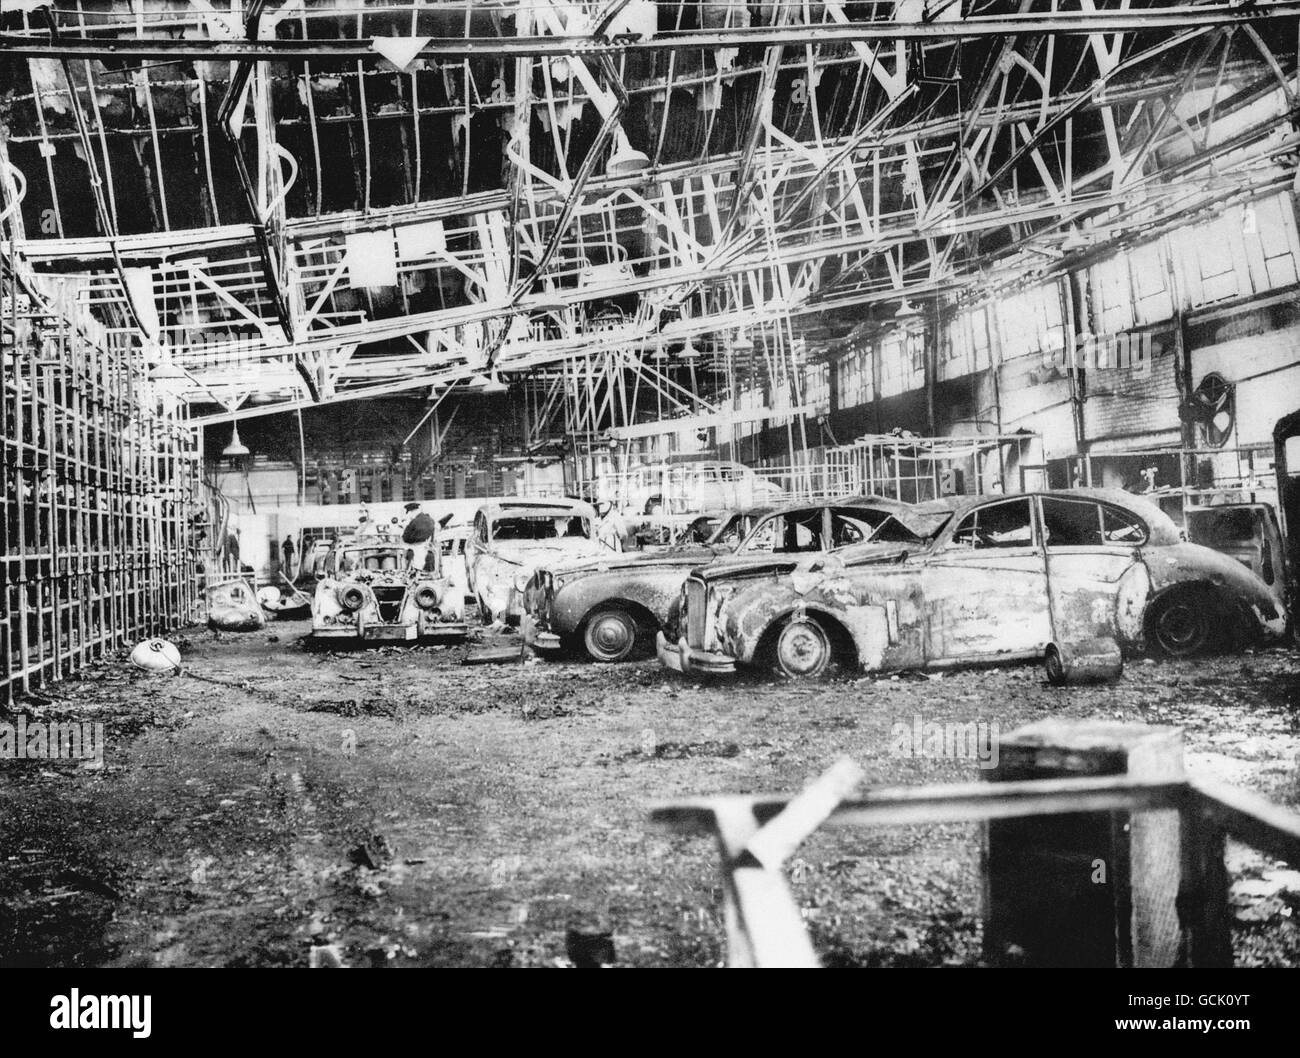 Jaguar Mk VIII's lay burnt and water-damaged after a fire swept through the car firm's Browns Lane Plant in Coventry during the night. Stock Photo